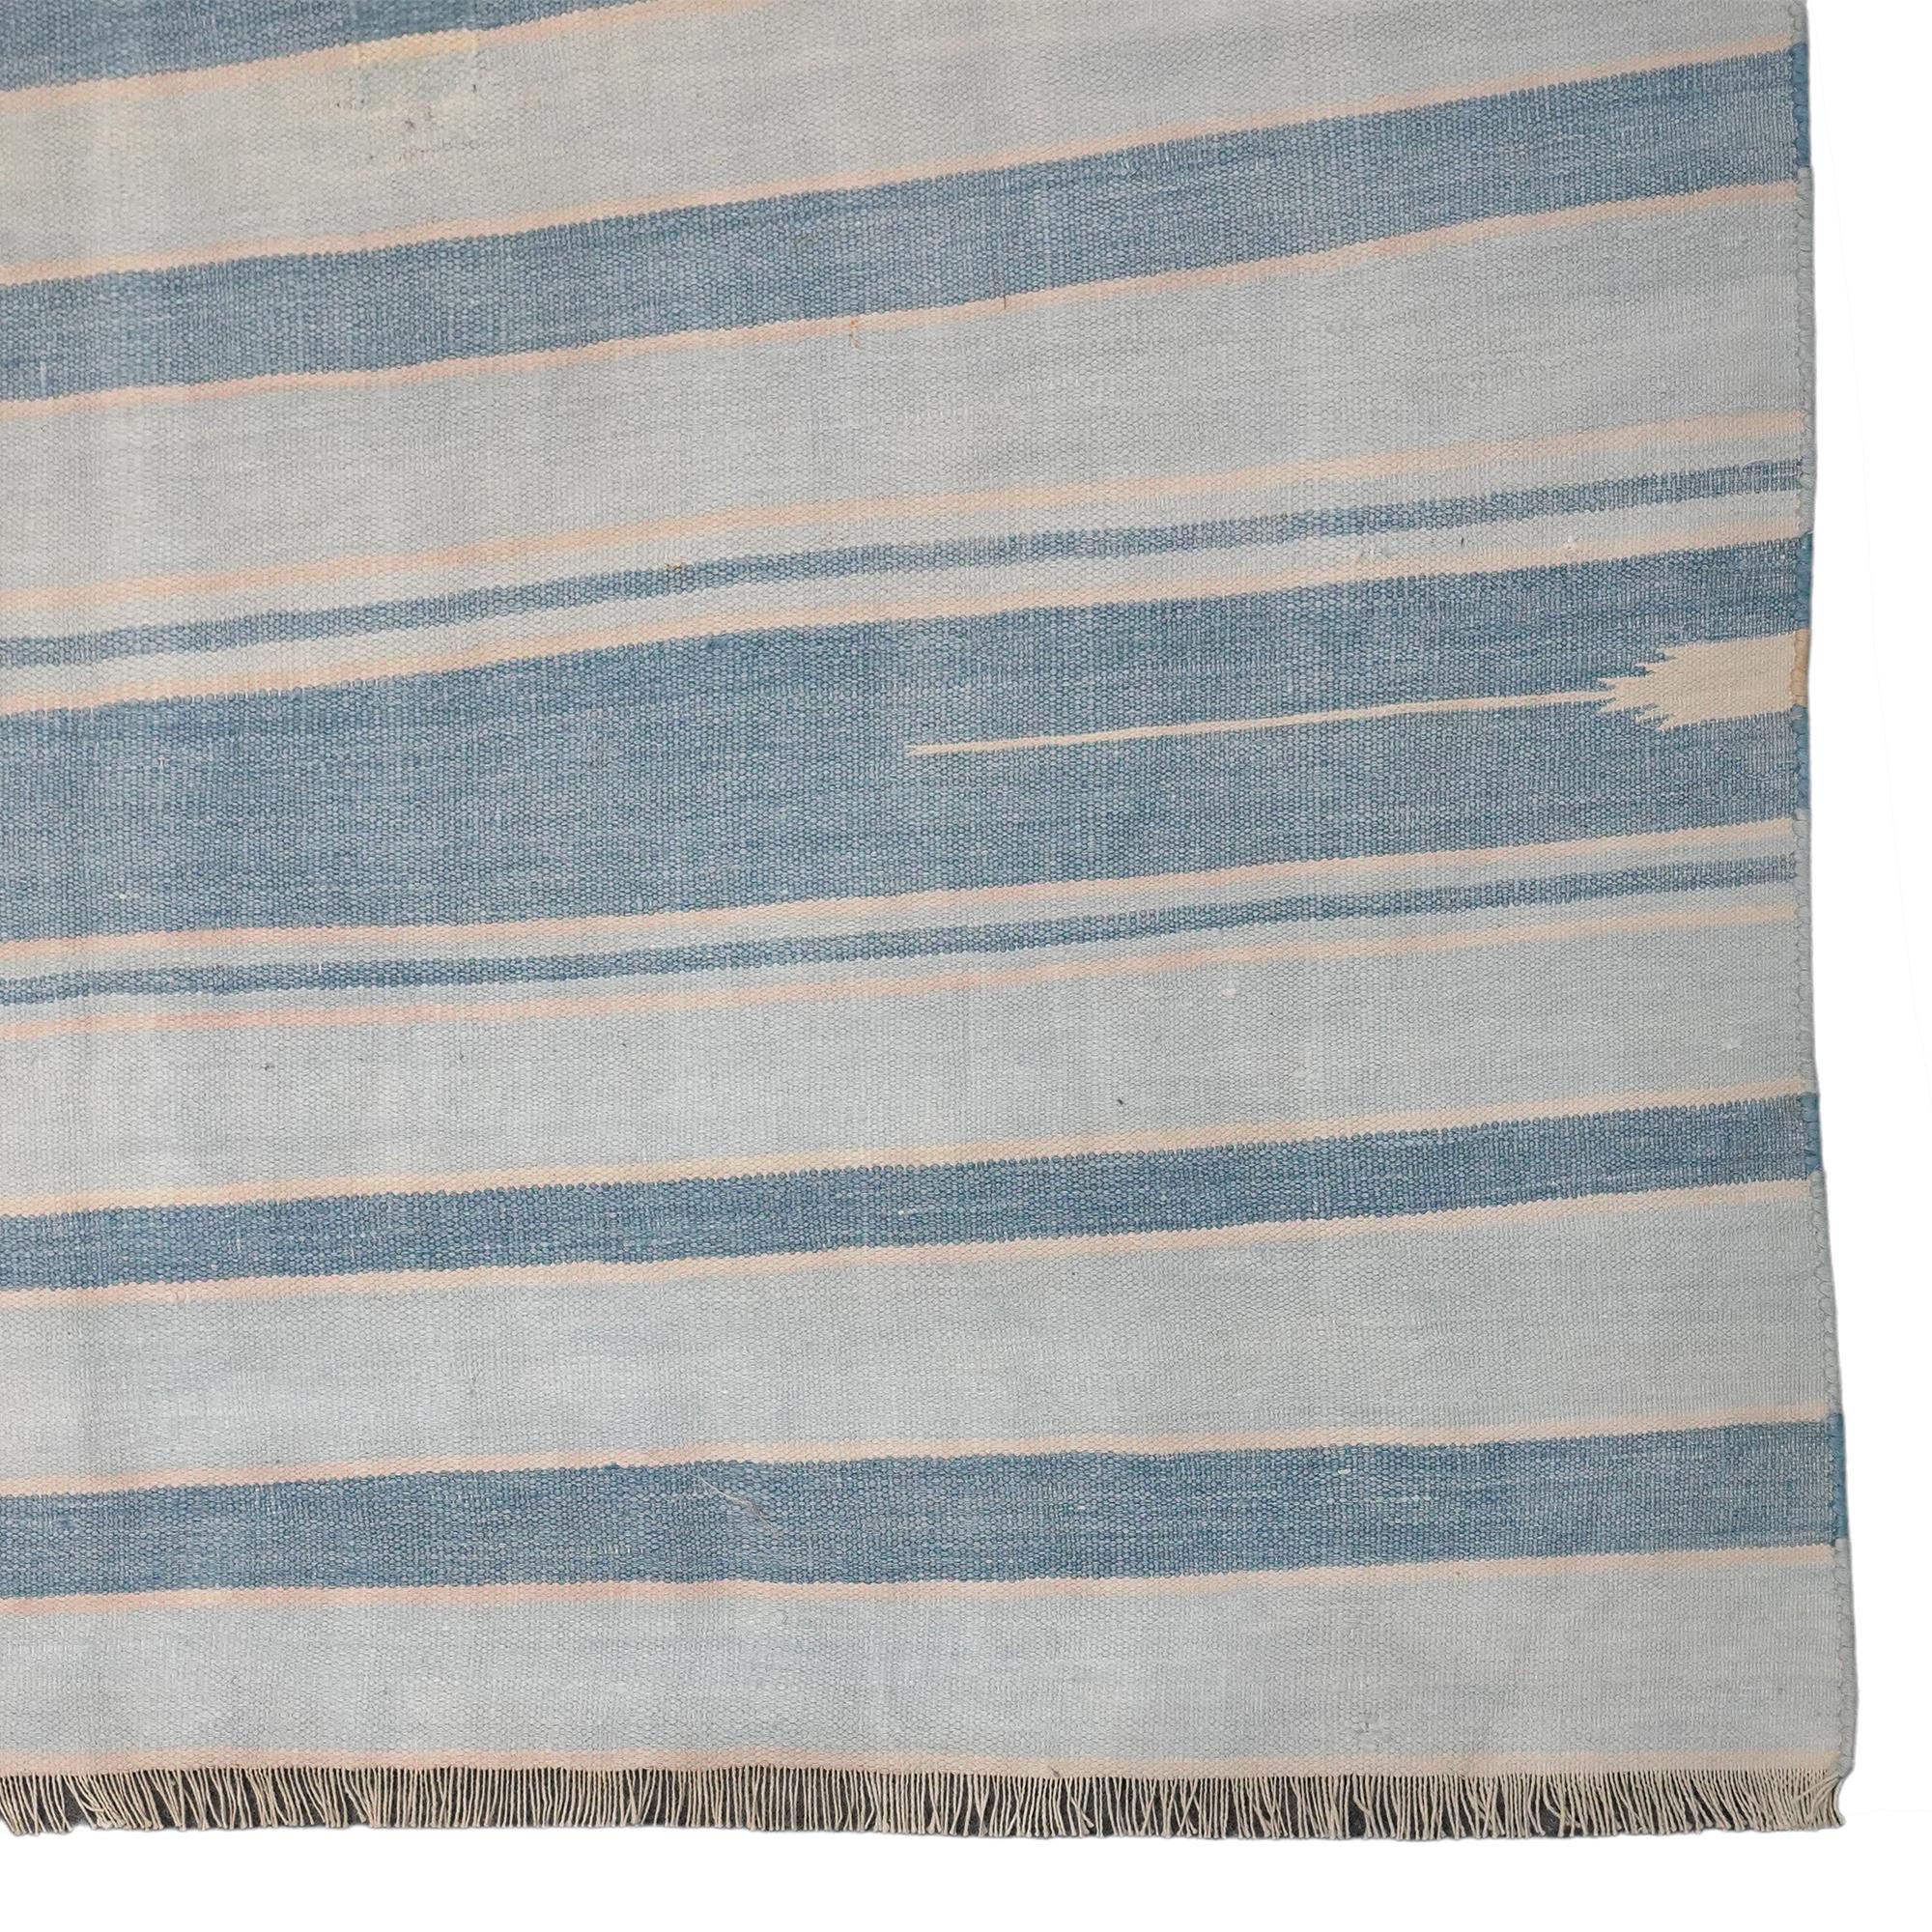 Mid-20th Century Vintage Dhurrie Rug, with Blue Geometric Stripes, from Rug & Kilim For Sale